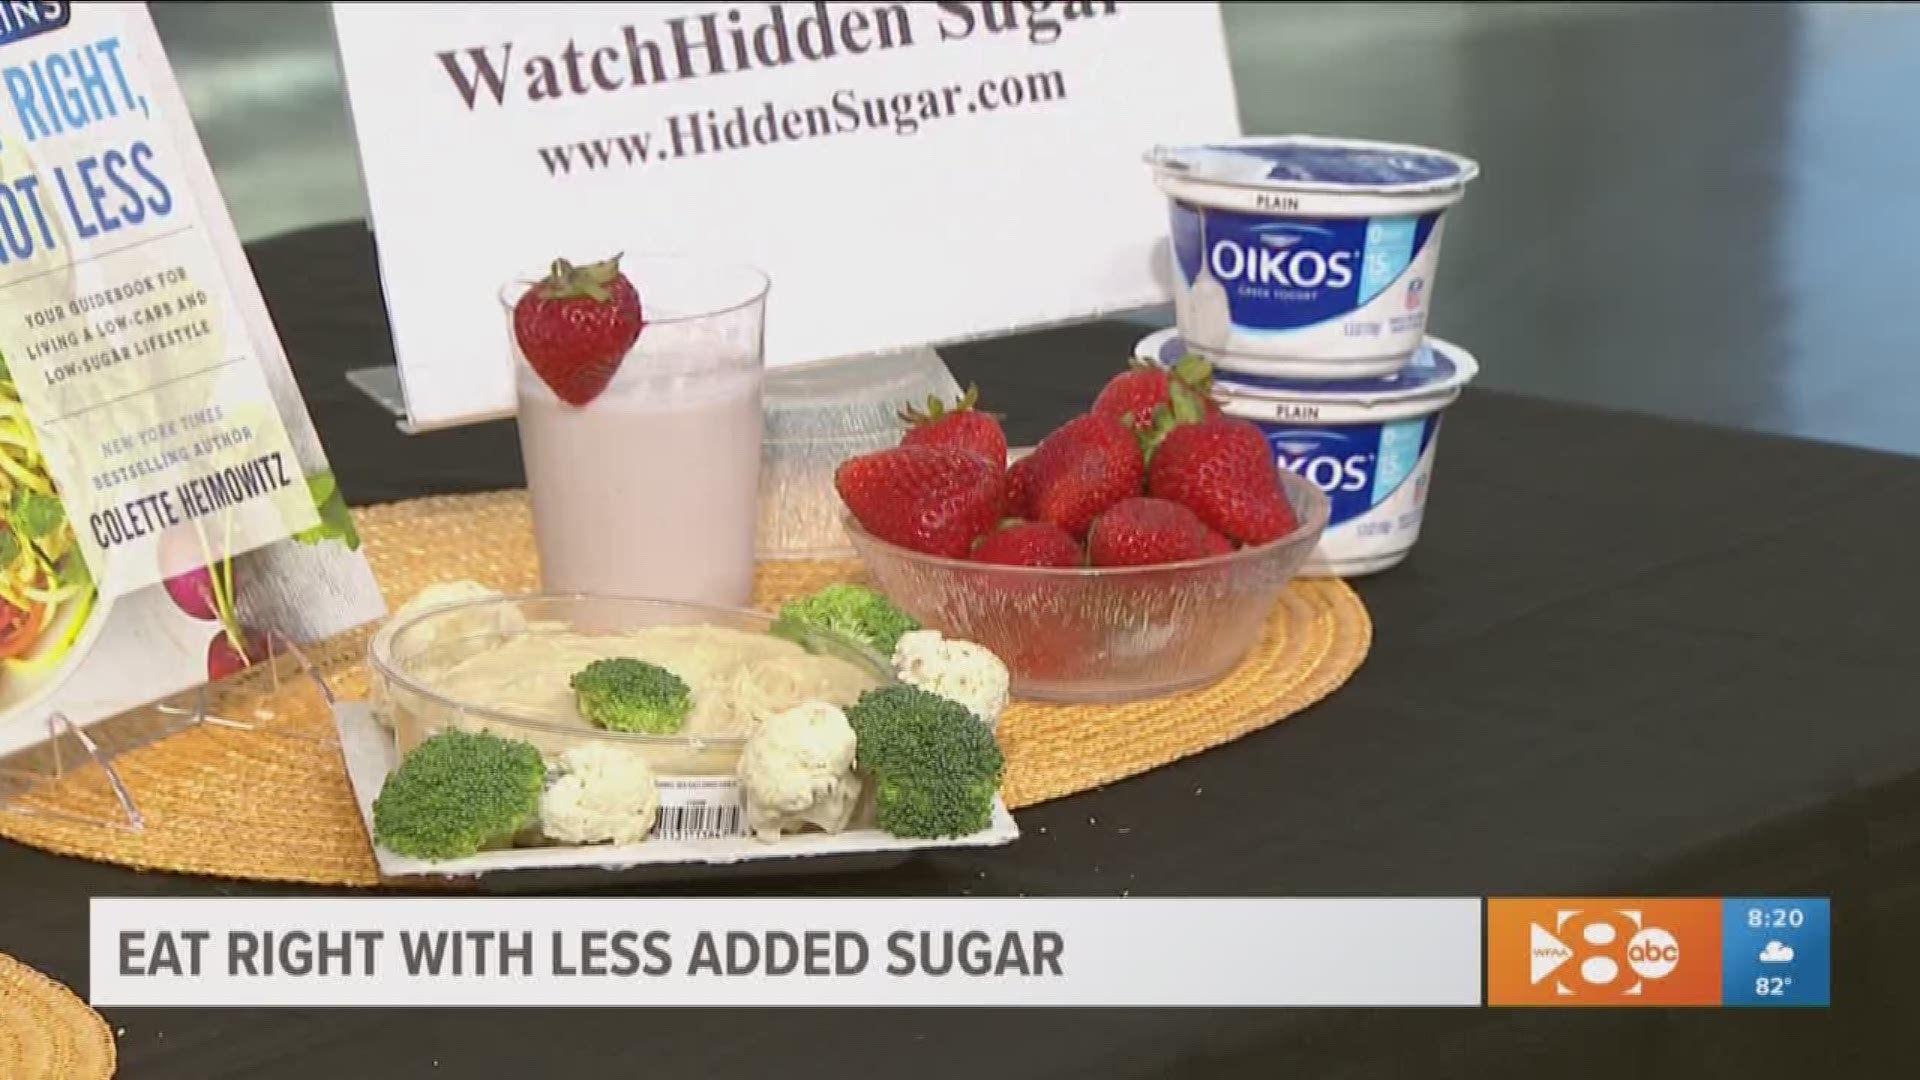 Dietician Pat Baird says simple changes are best to start a routine.